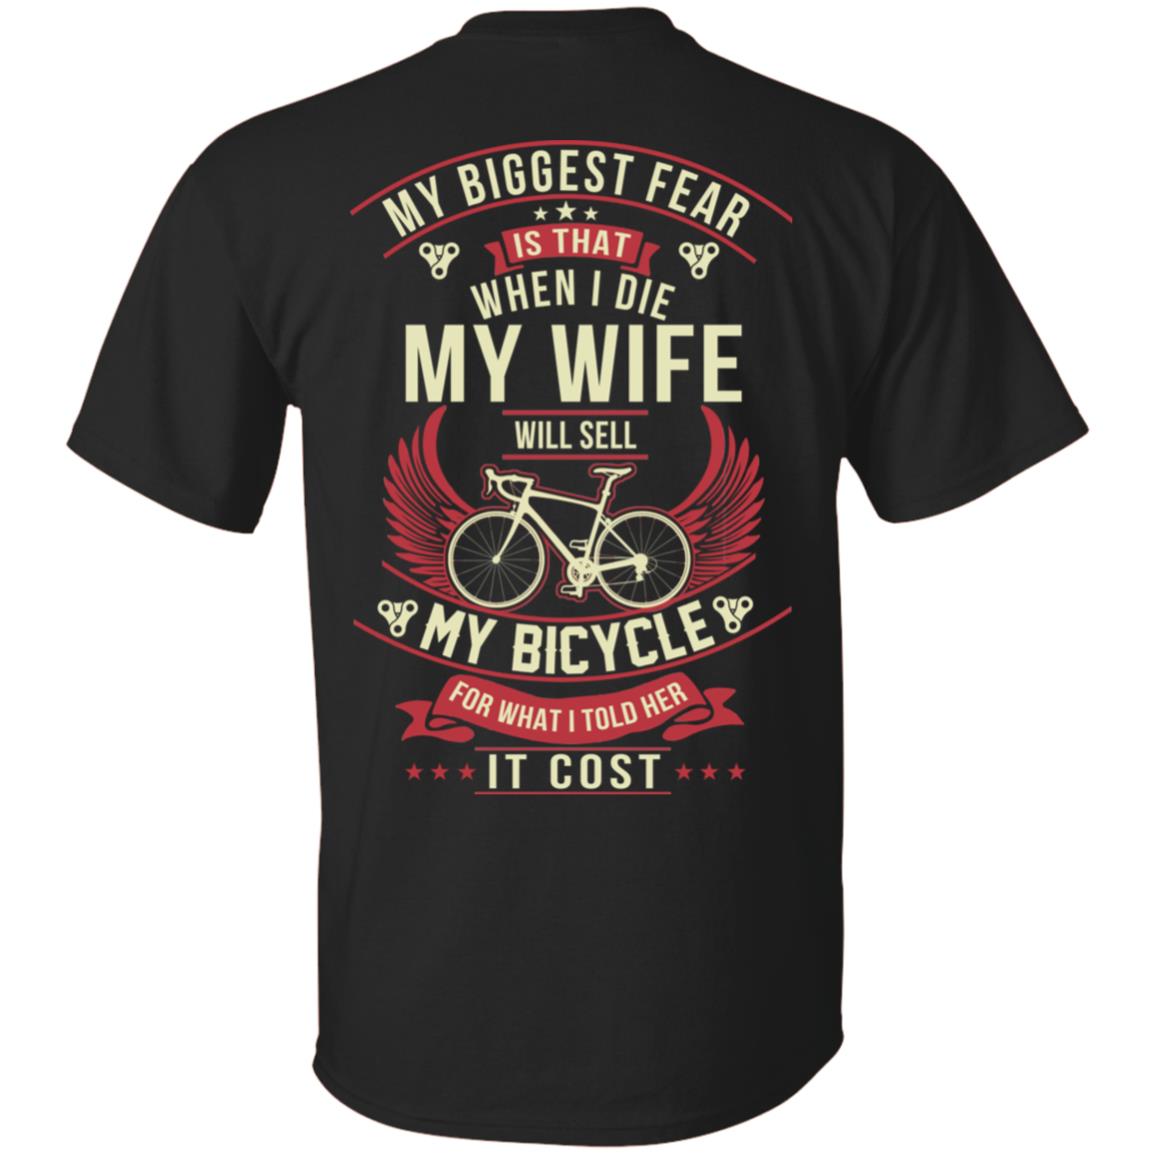 Cycling Shirt: My Biggest Fear Is When I Die My Wife Sell My Bicycle Shirt